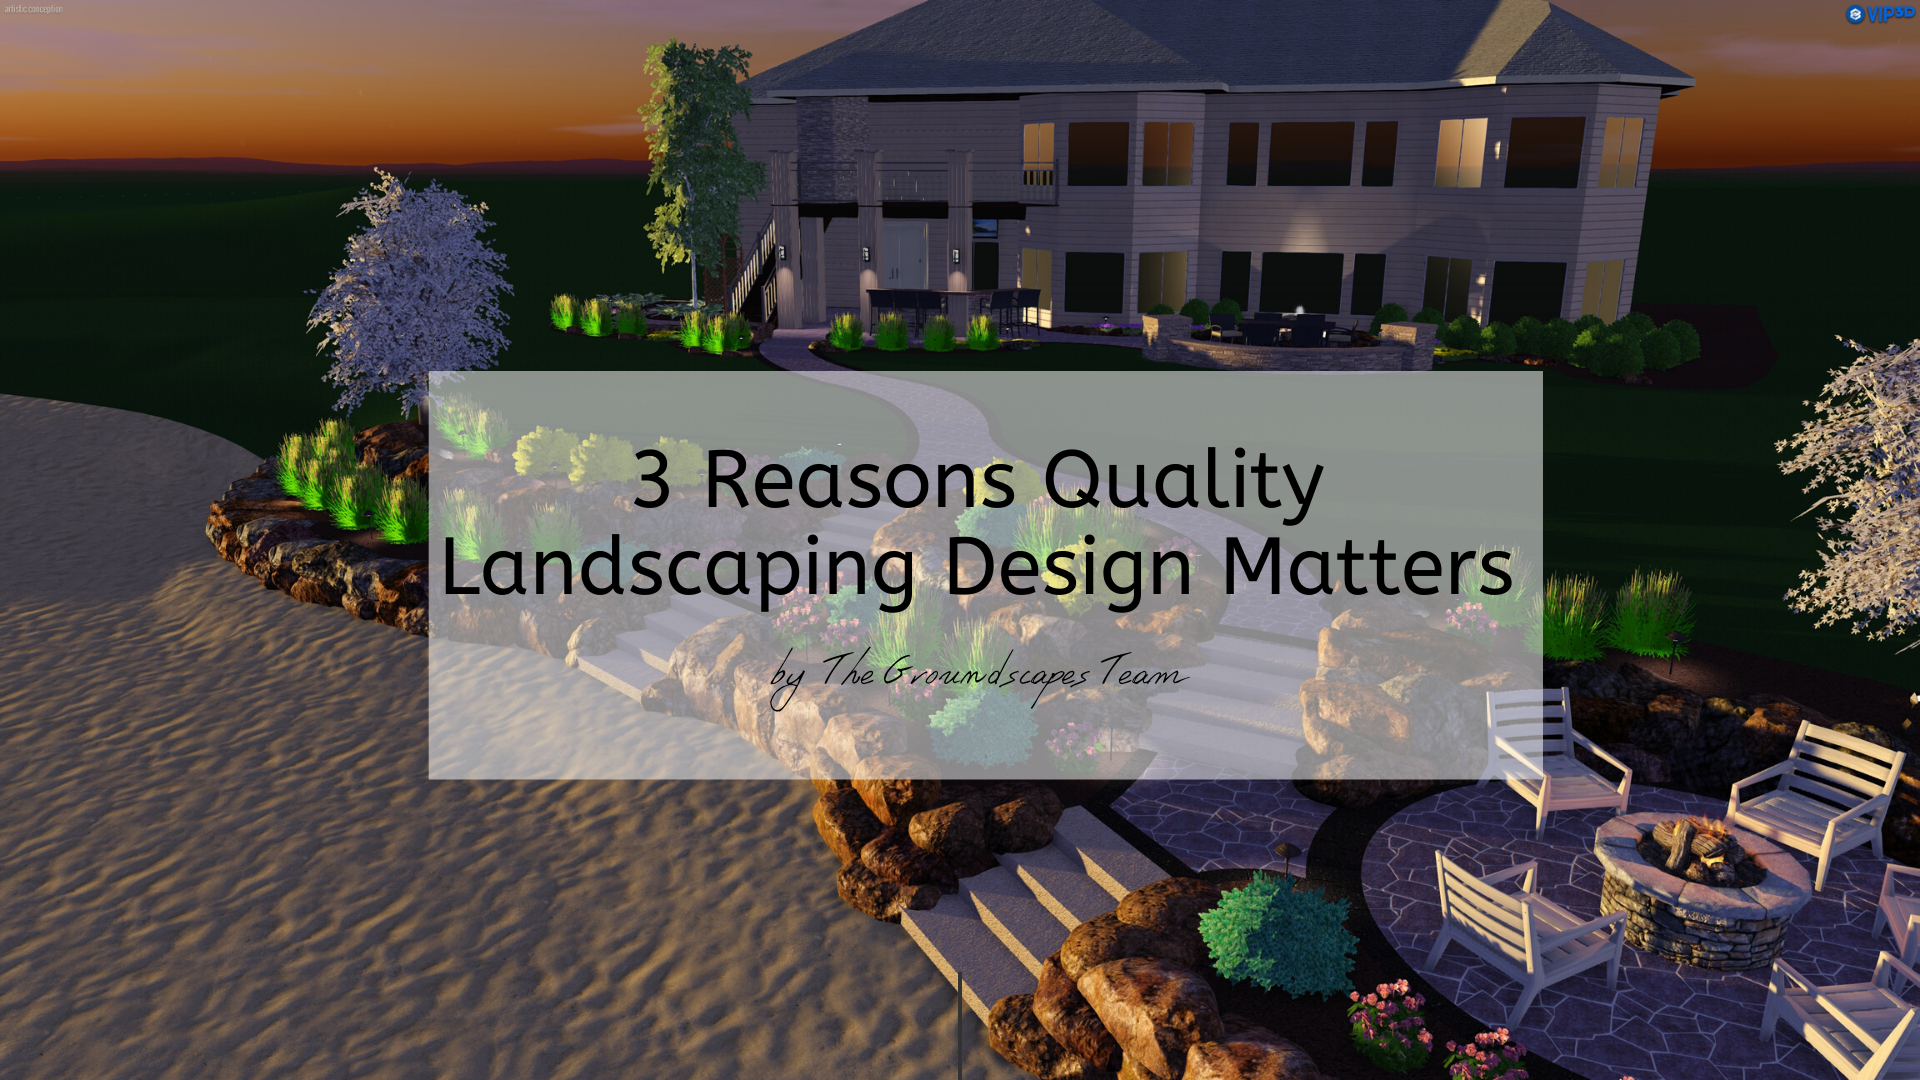 3 Reasons Quality Landscaping Design Matters